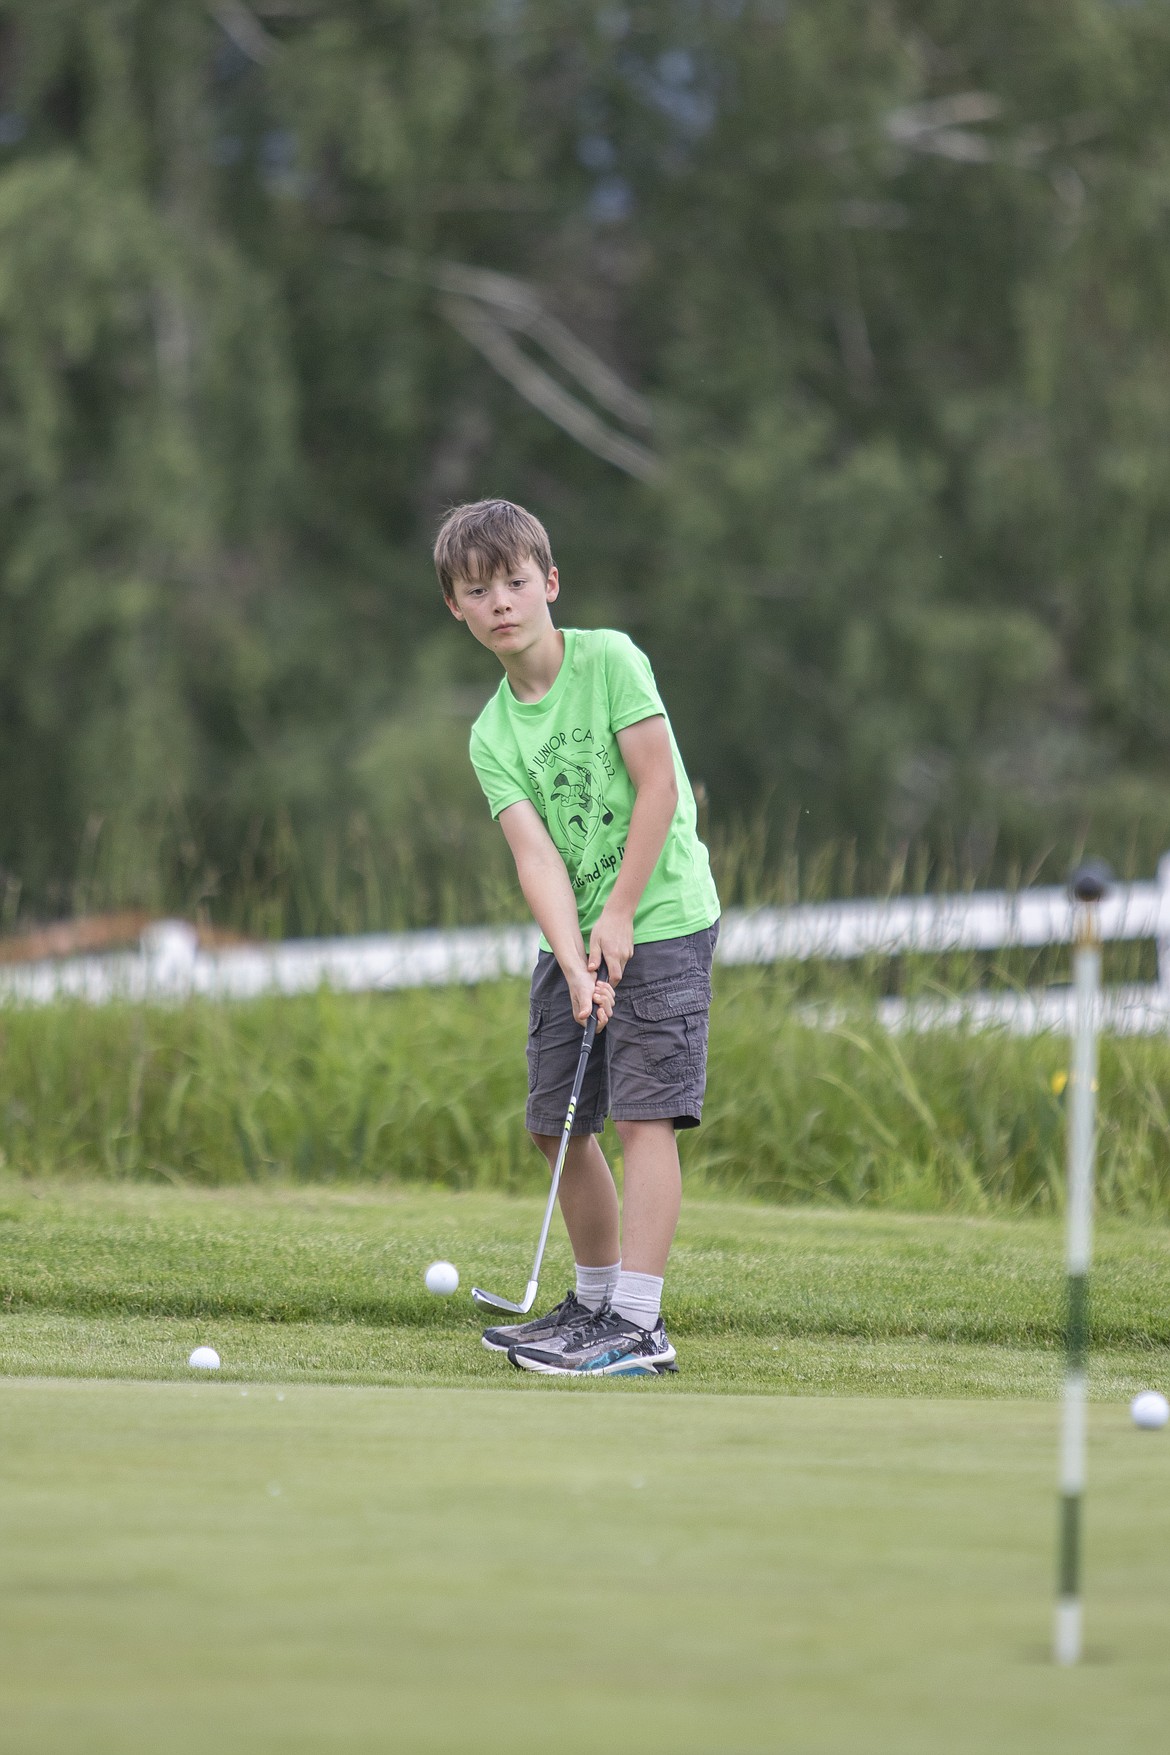 Gabe Blood makes a nice shot during the Junior Camp Pitch, Putt, and Drive Competition held at the Polson Bay Golf Course on Friday.